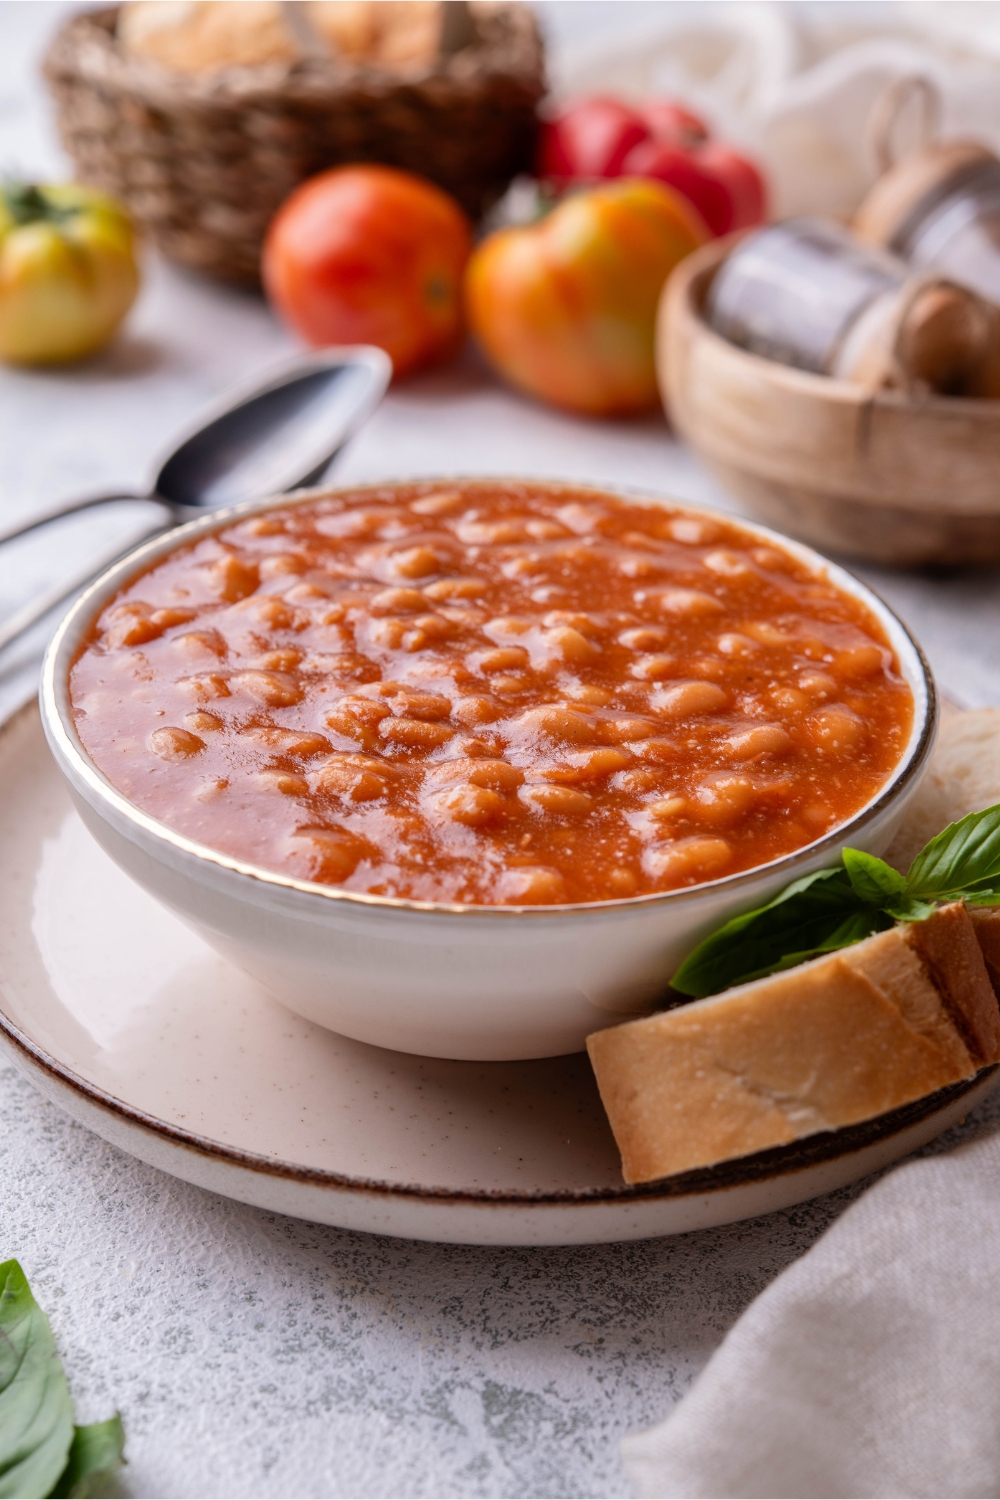 A bowl of baked beans served with bread slices.